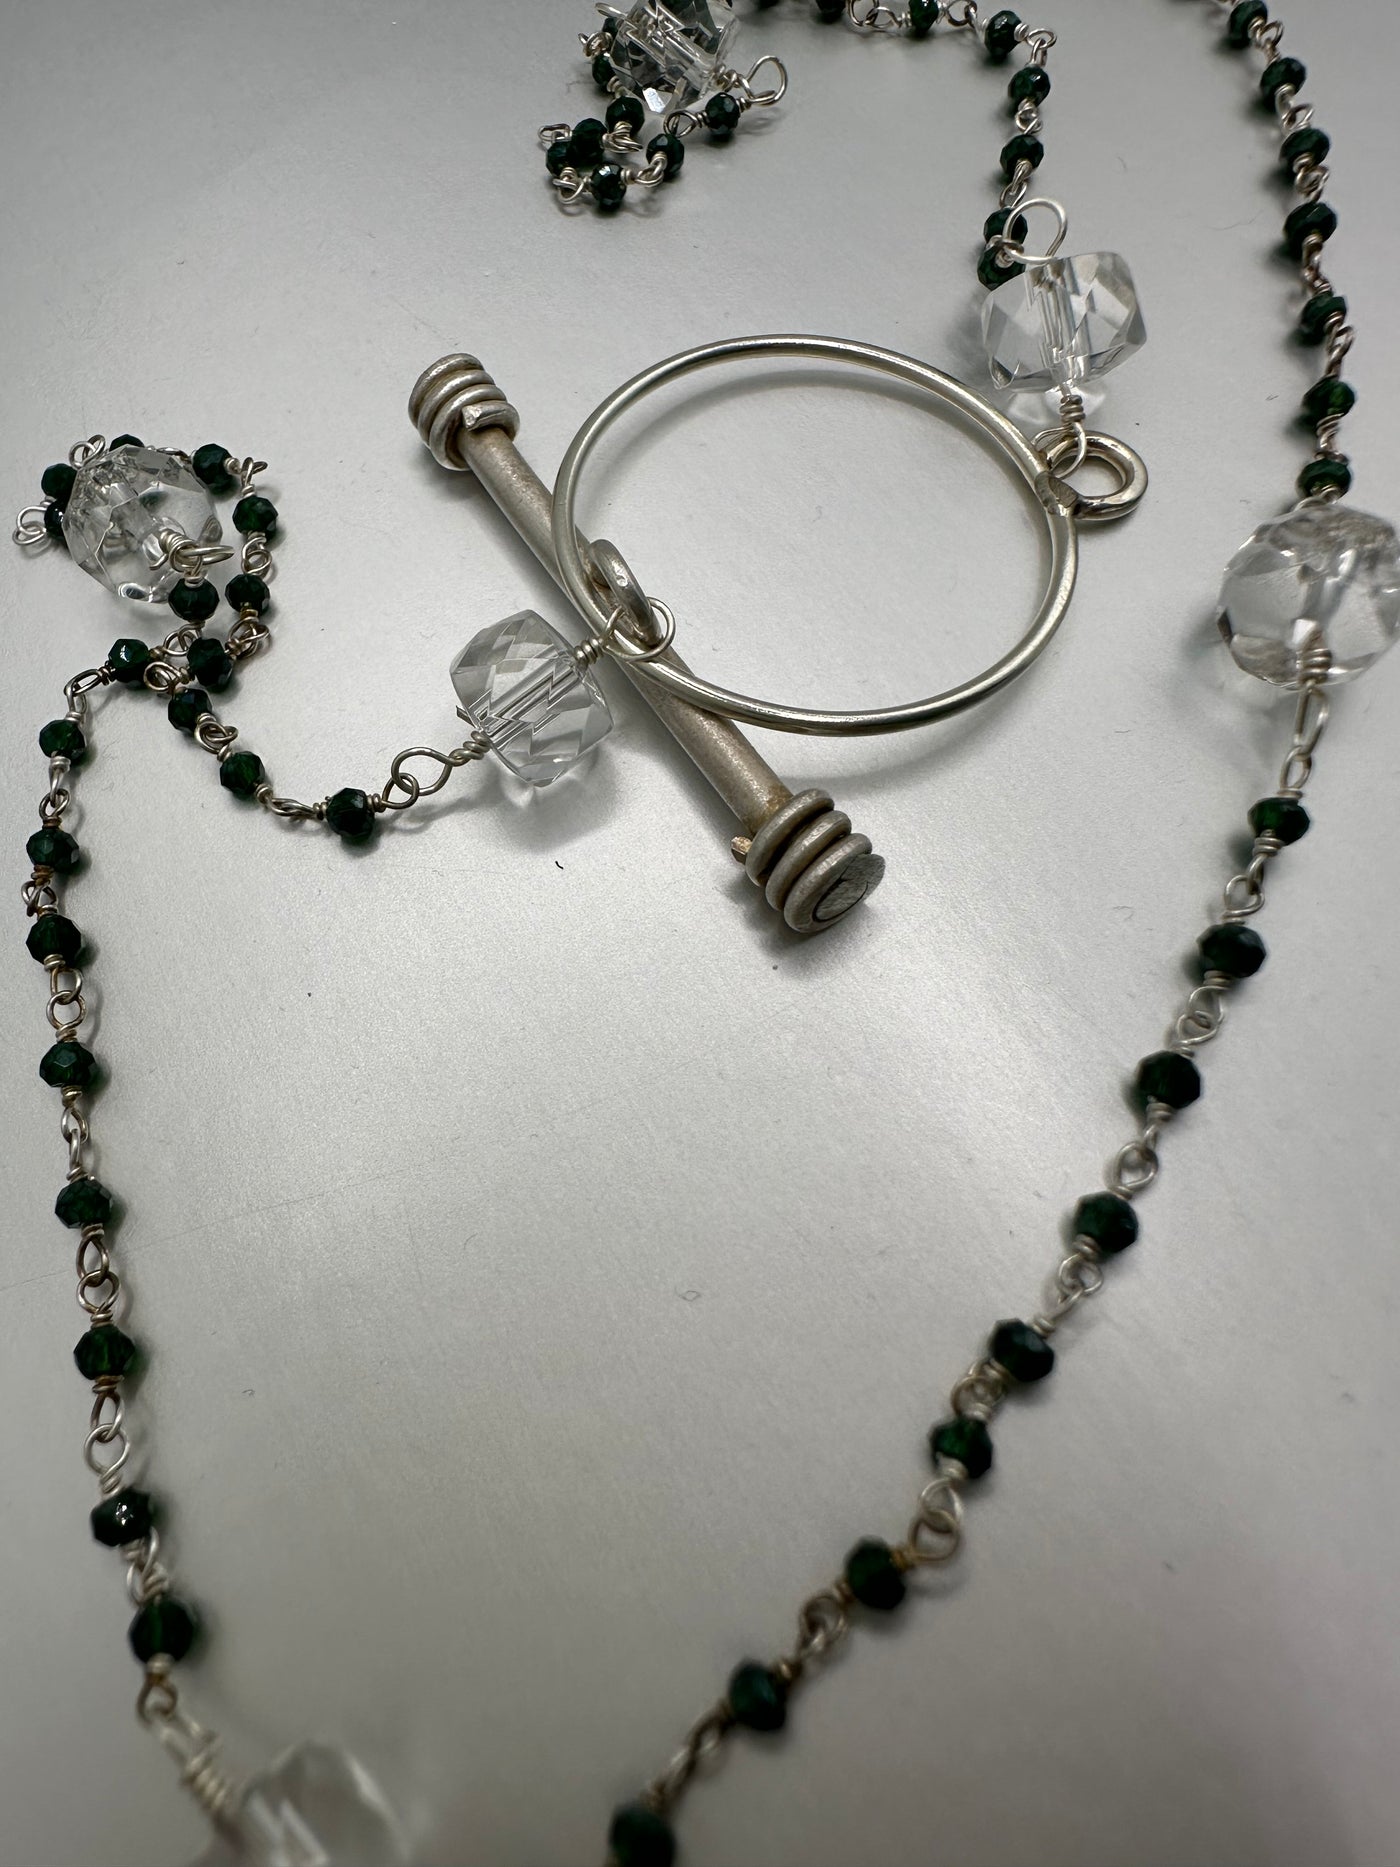 Sterling silver and rock crystals with green beads and handmade Doric closure